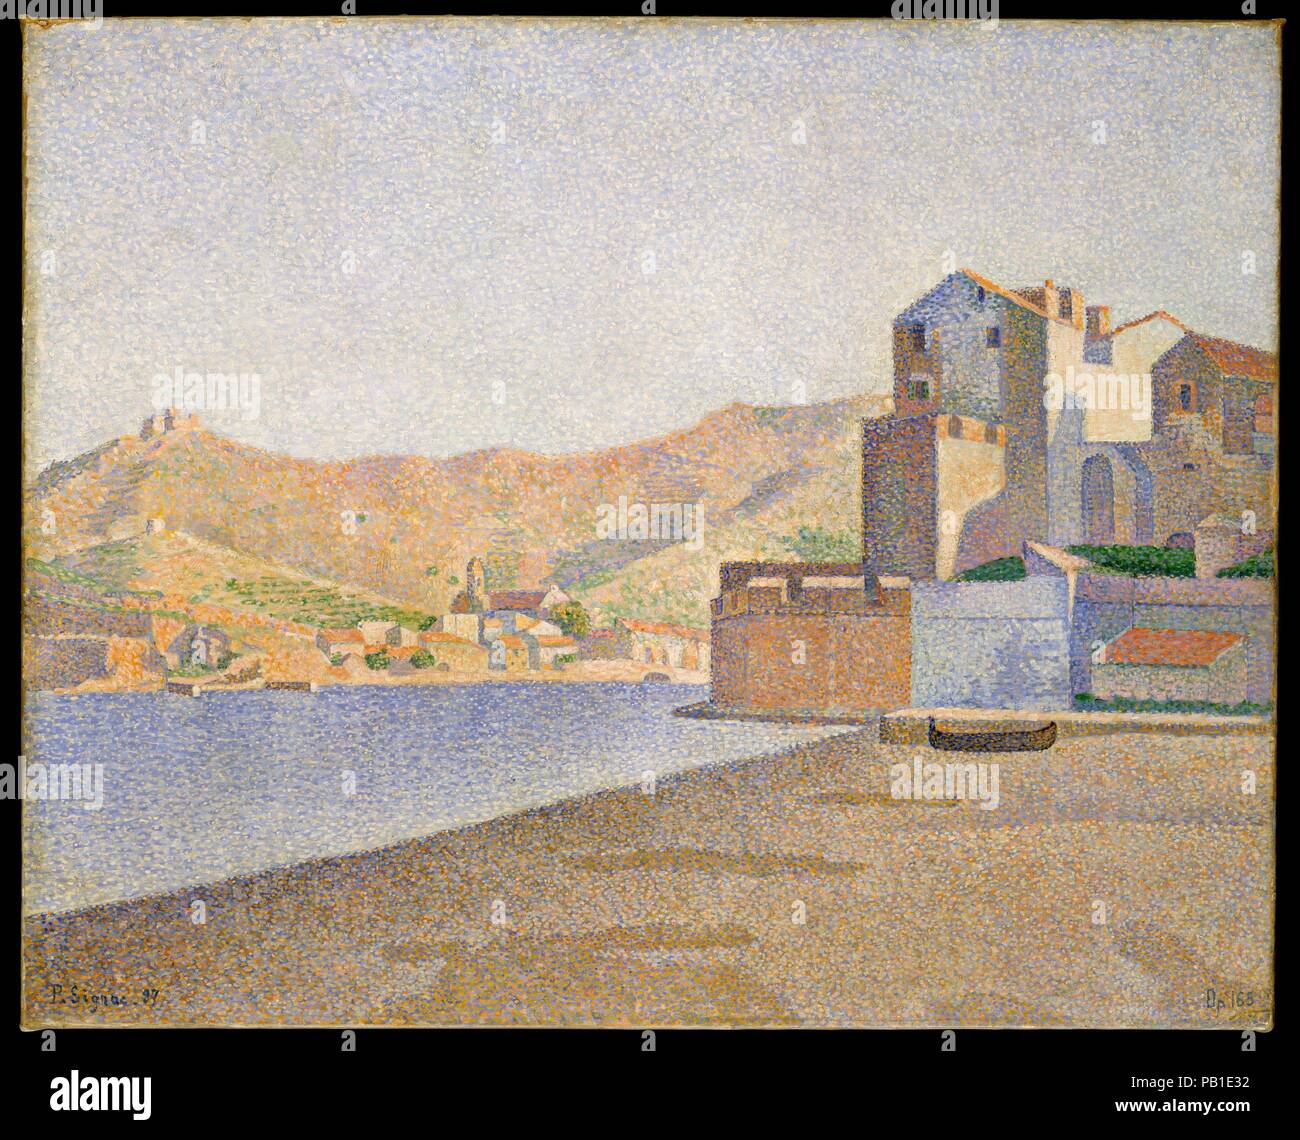 The Town Beach, Collioure, Opus 165 (Collioure. La Plage de la ville. Opus 165). Artist: Paul Signac (French, Paris 1863-1935 Paris). Dimensions: 24 3/4 x 31 1/2 in. (62.9 x 80 cm). Date: 1887.  Beginning in 1886, Signac worked in the Neoimpressionist  style, layering dots and dashes of paint to  create optical colored effects. Viewed closely, the eye  registers the tiny brush marks of pigment as detached;  viewed from a distance, however, the eye blends the  colors and they appear as larger, cohesive forms. The  Lehman picture is one of four summer landscapes that  Signac painted during his s Stock Photo